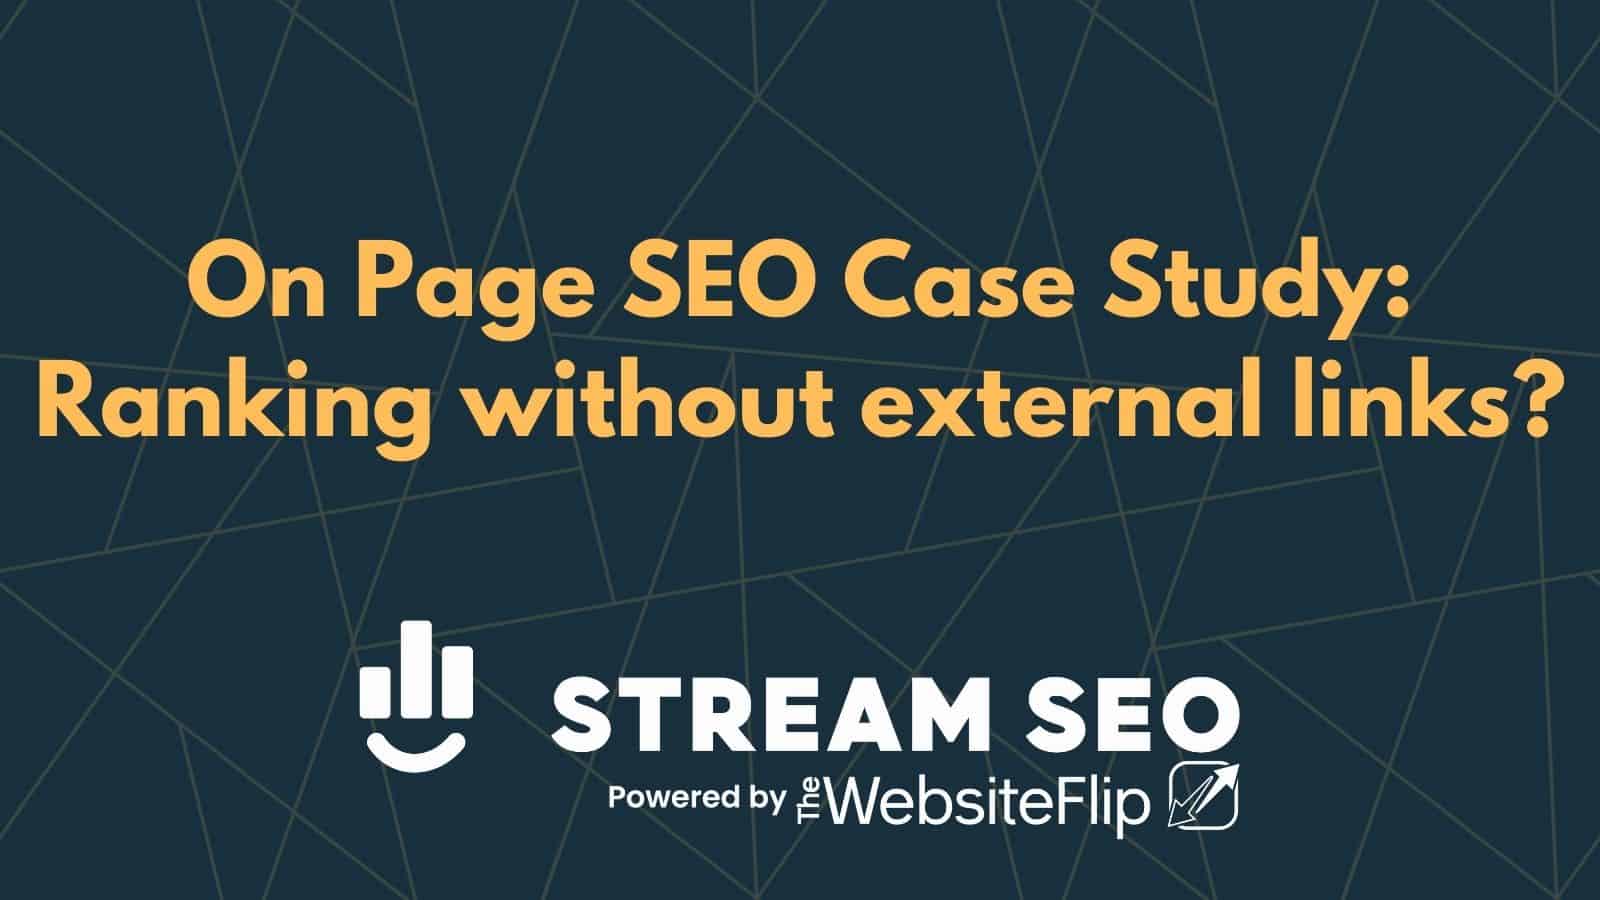 On Page SEO Case Study: Ranking without external links?